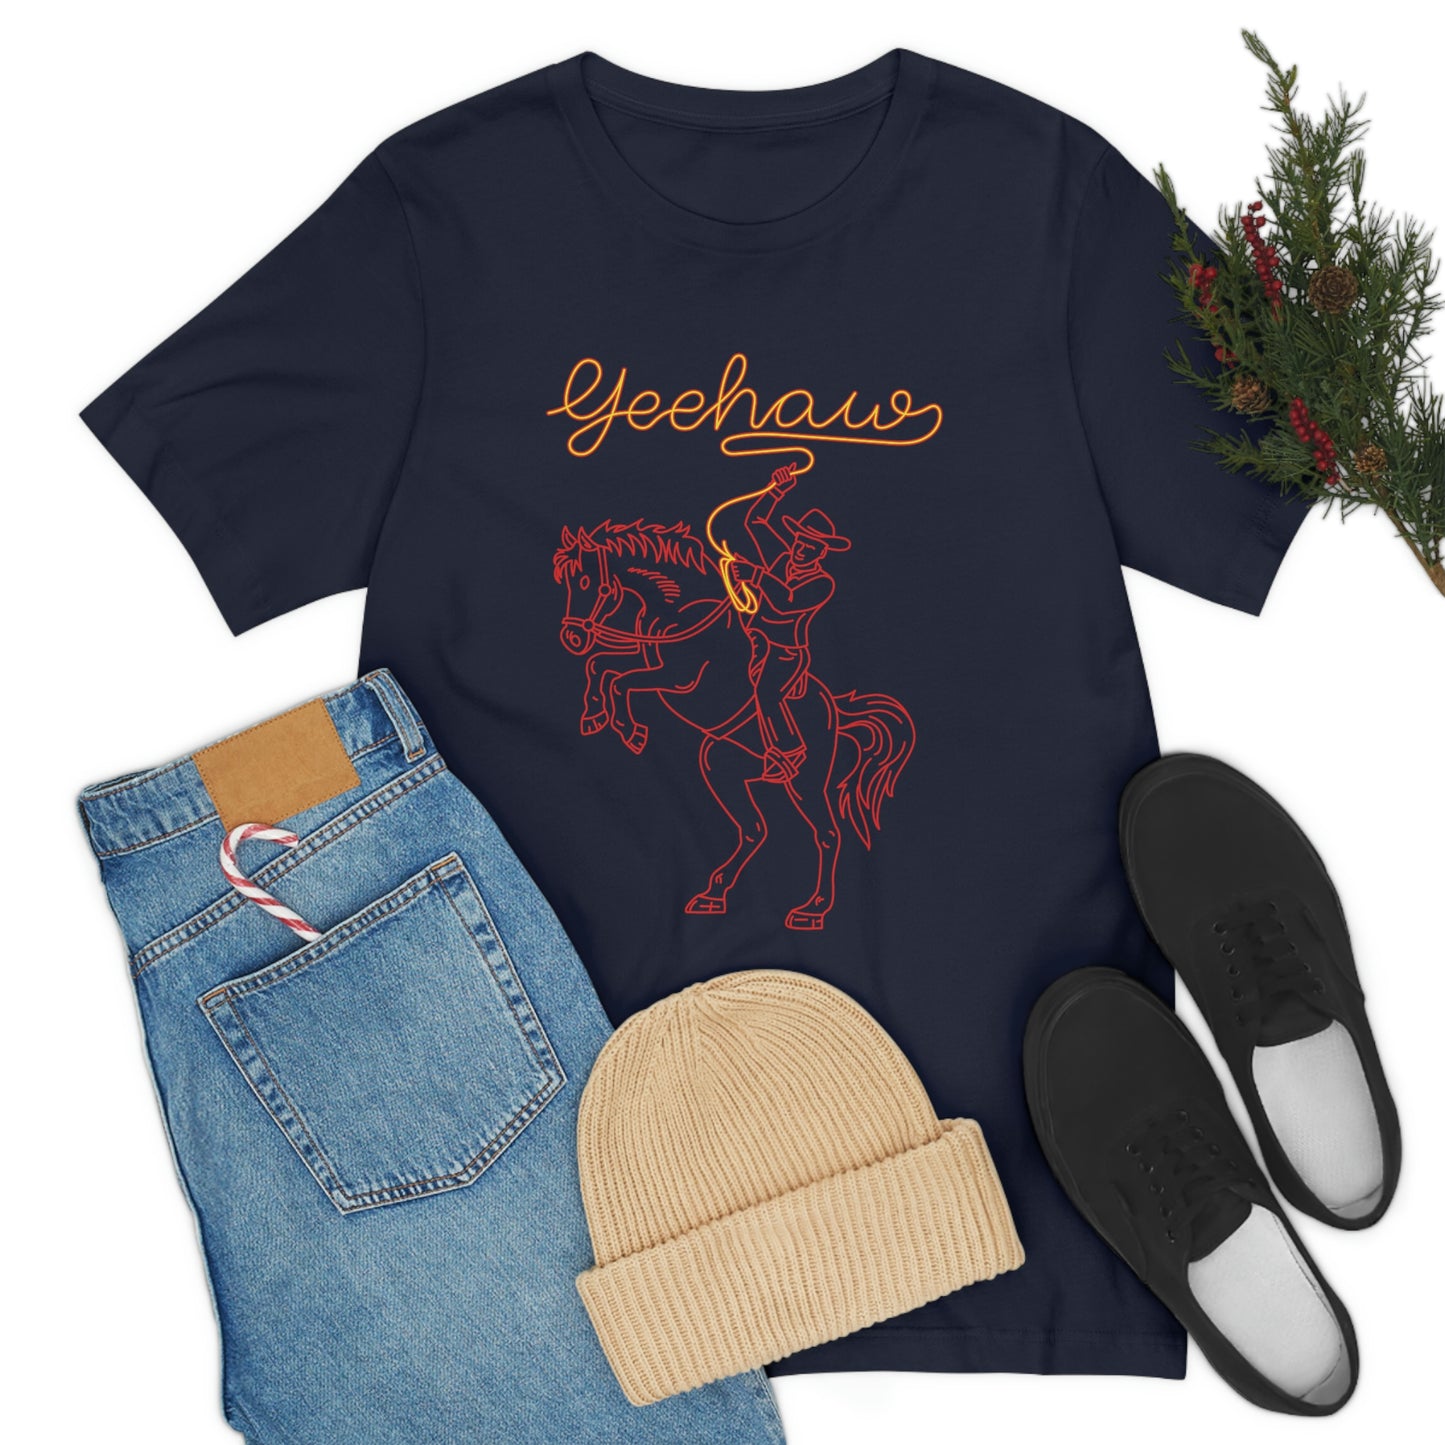 Navy T-Shirt featuring a neon design of a cowboy with a lasso saying 'yeehaw' in yellow and red, from the TEQNEON Word Craft collection